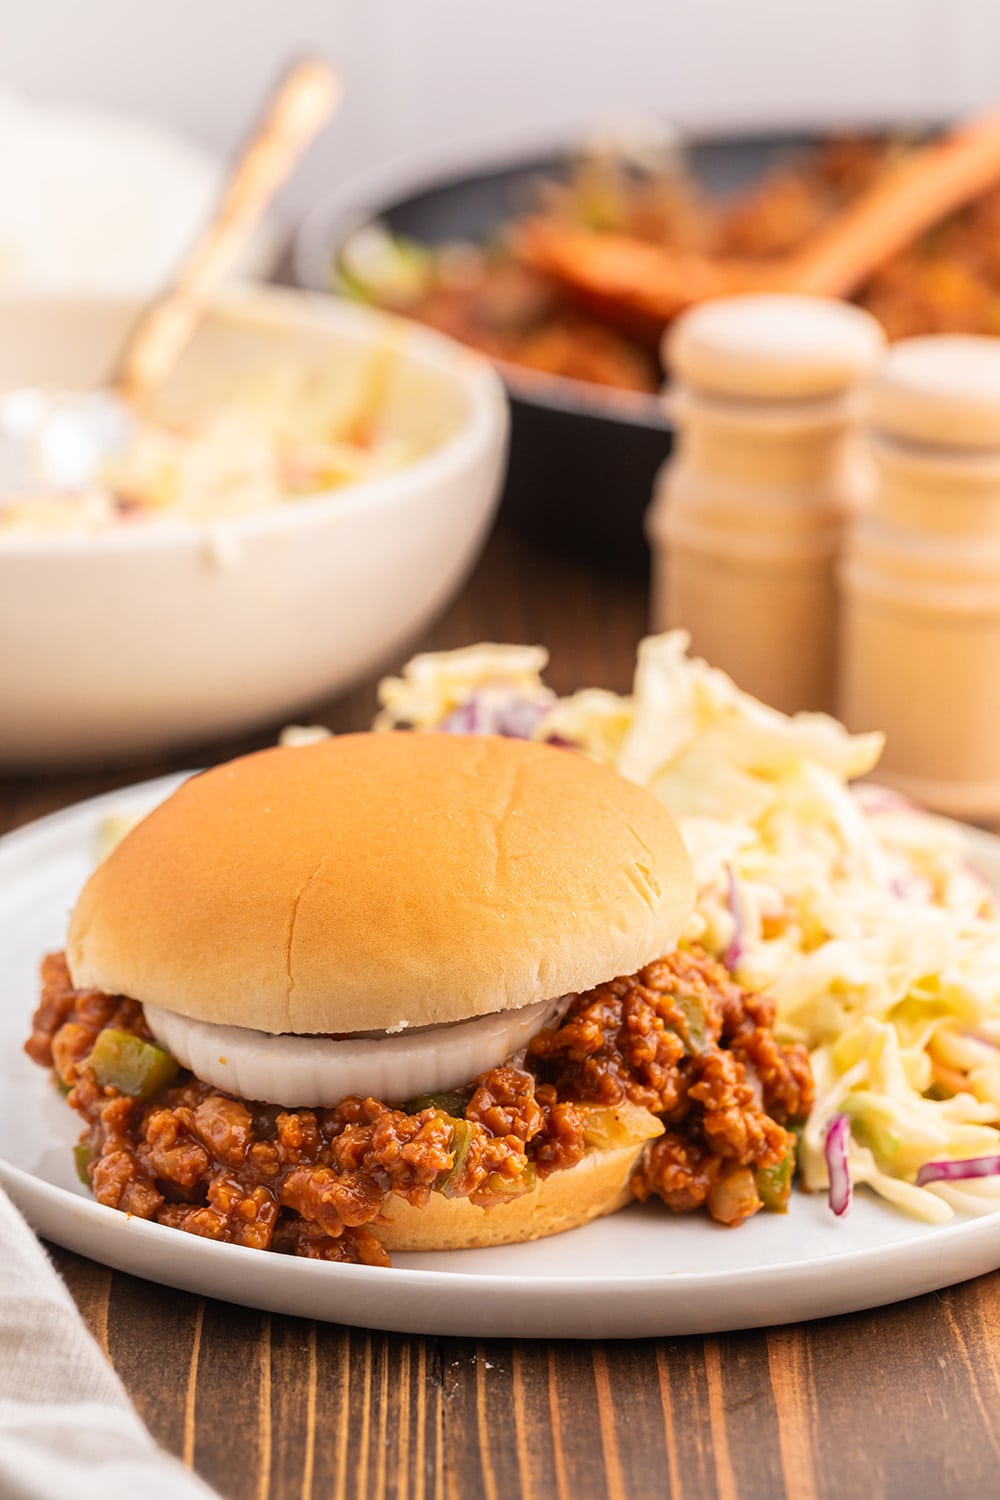 Vegan Sloppy Joes are perfect for casual get-togethers or family dinners